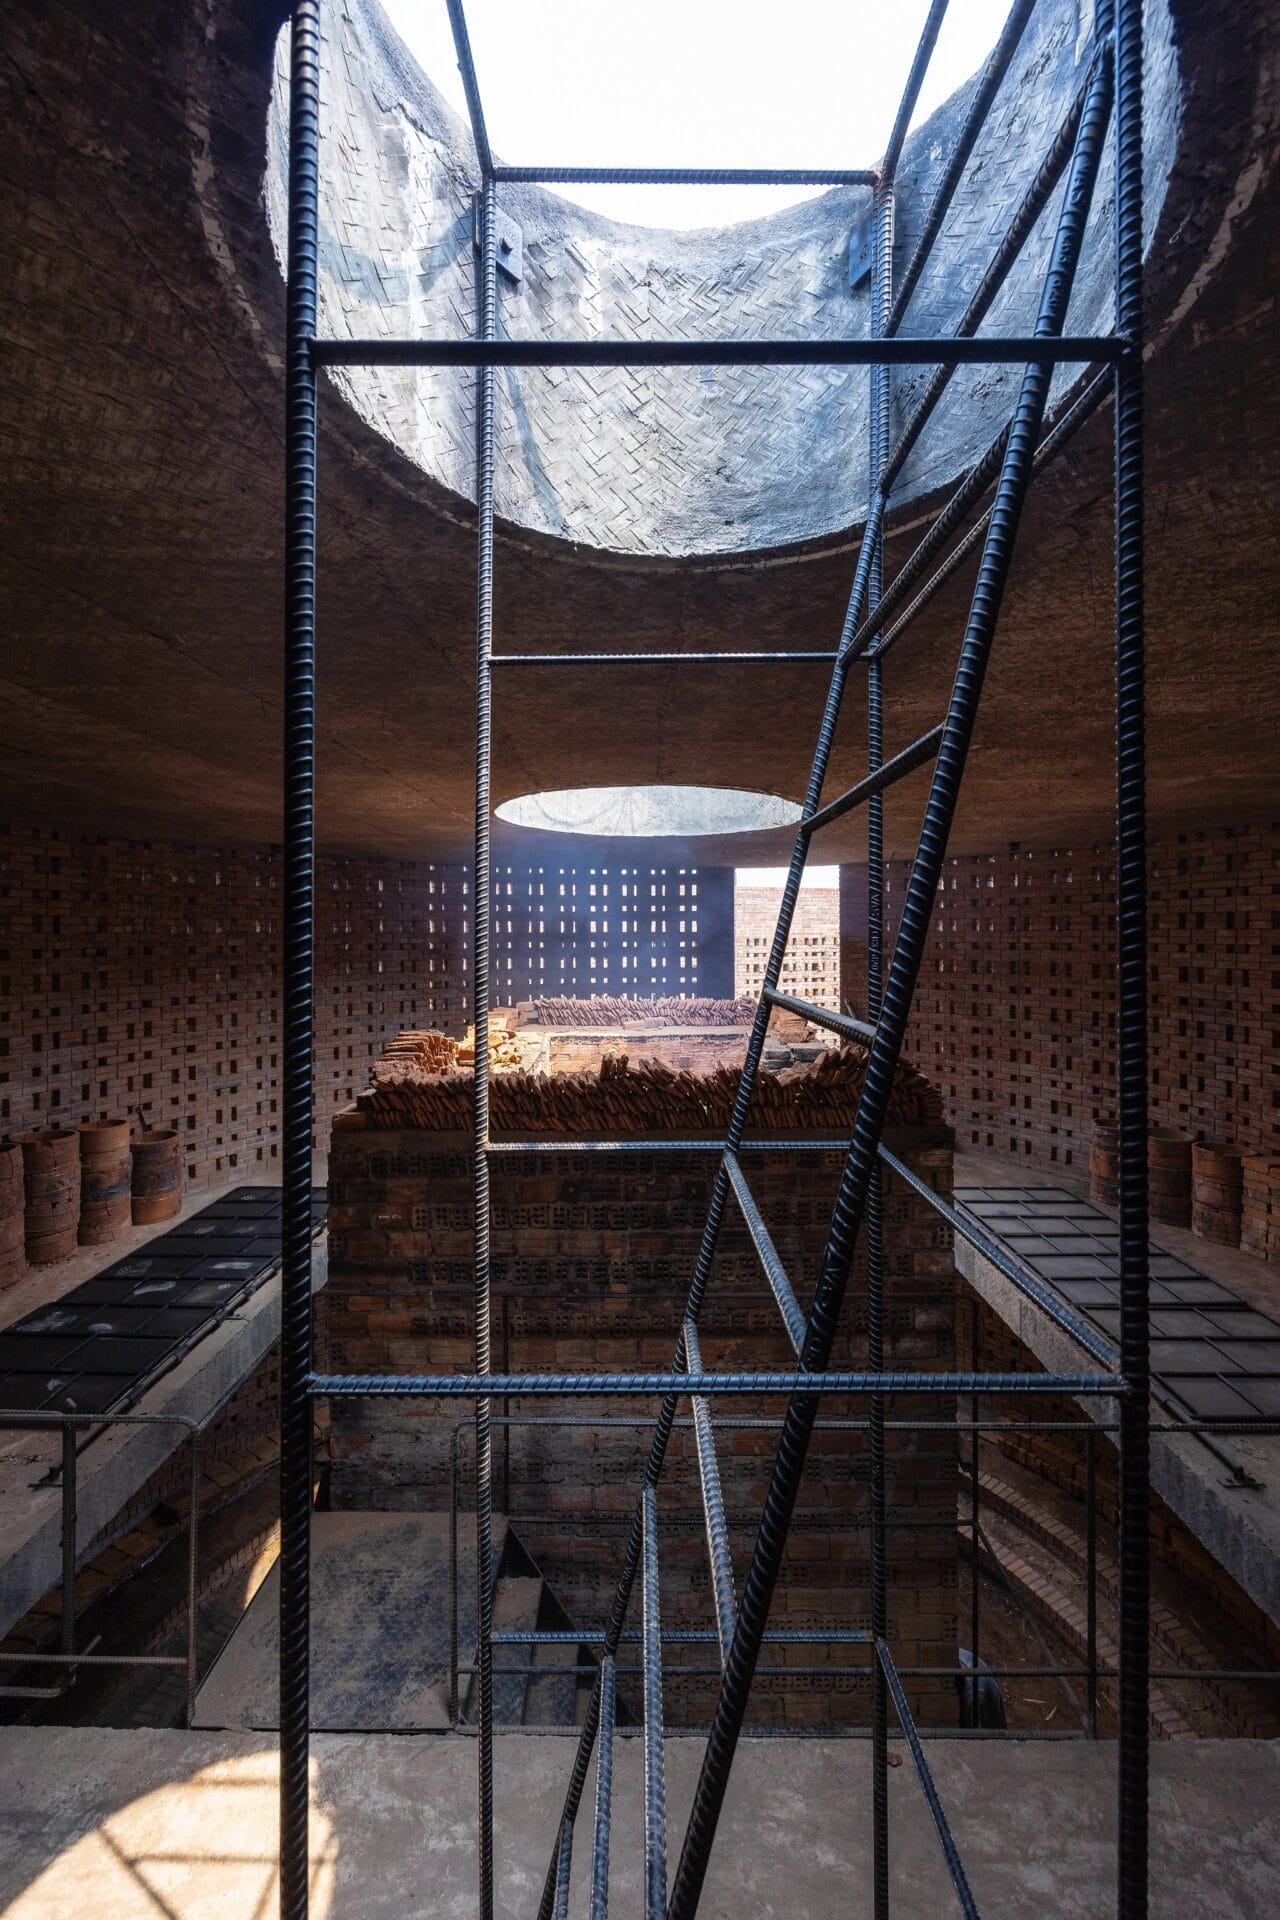 the inside of the kiln with scaffolding and an open top